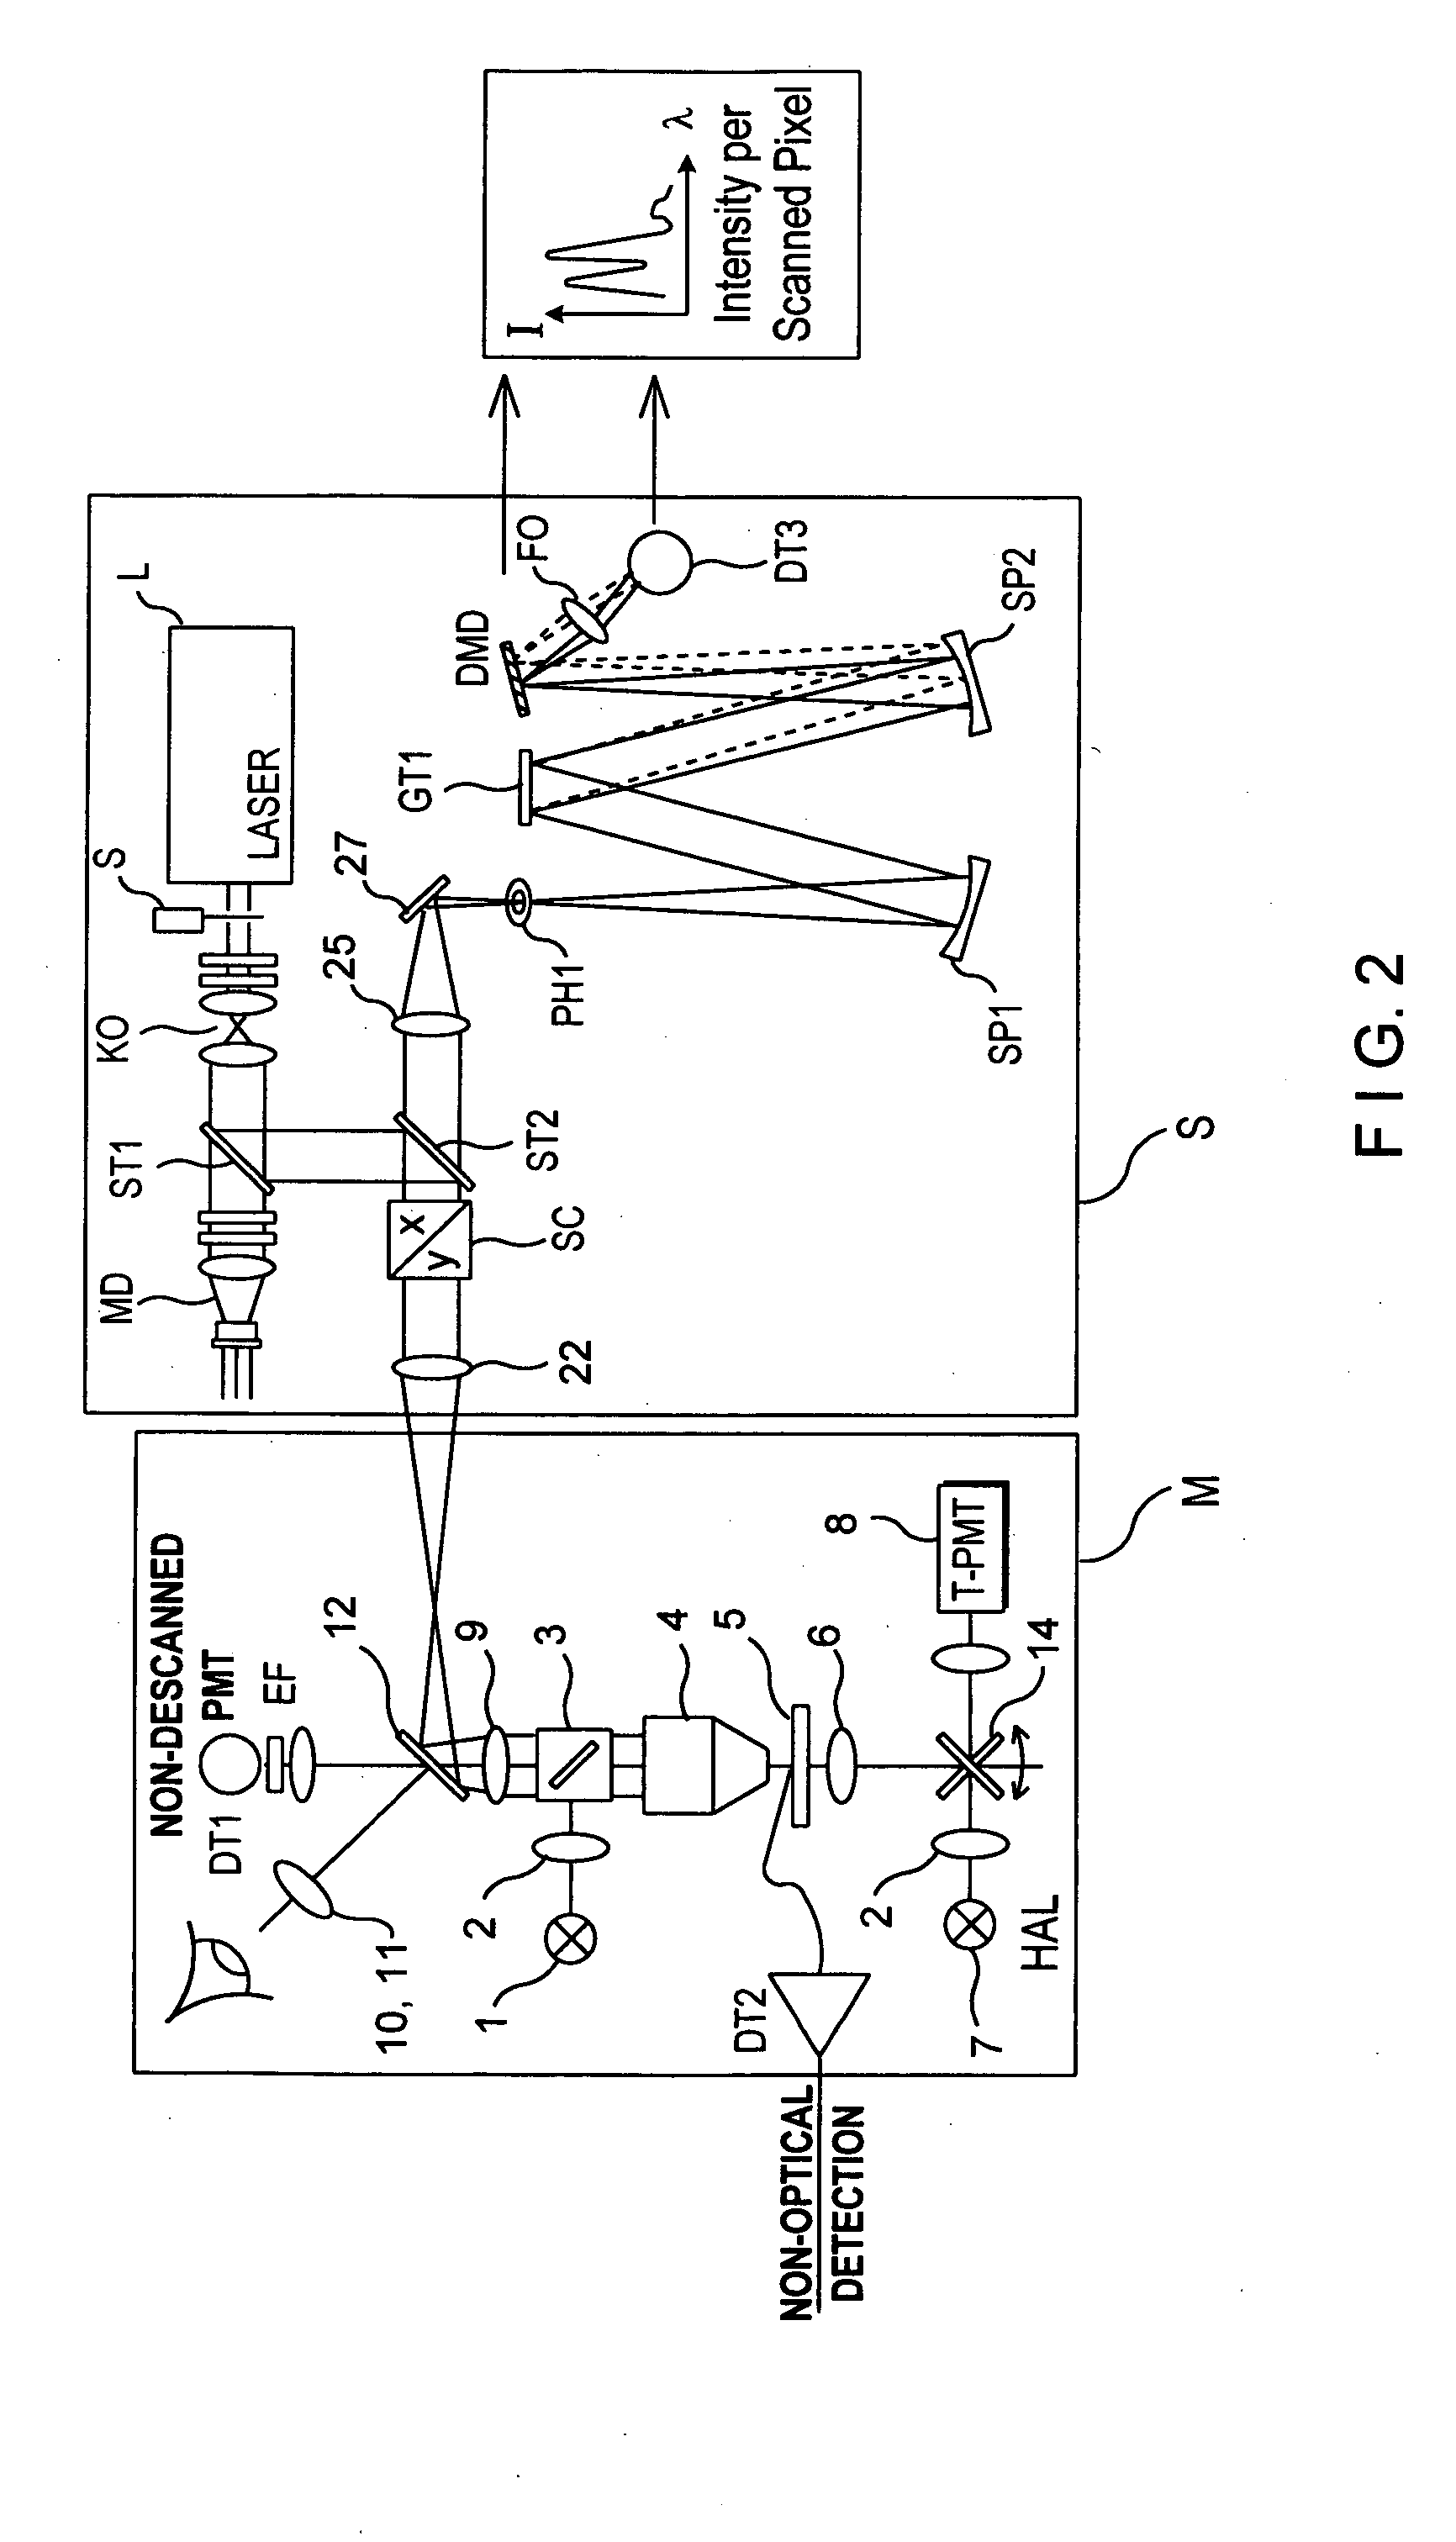 Arrangement for illumination and/or detection in a microscope